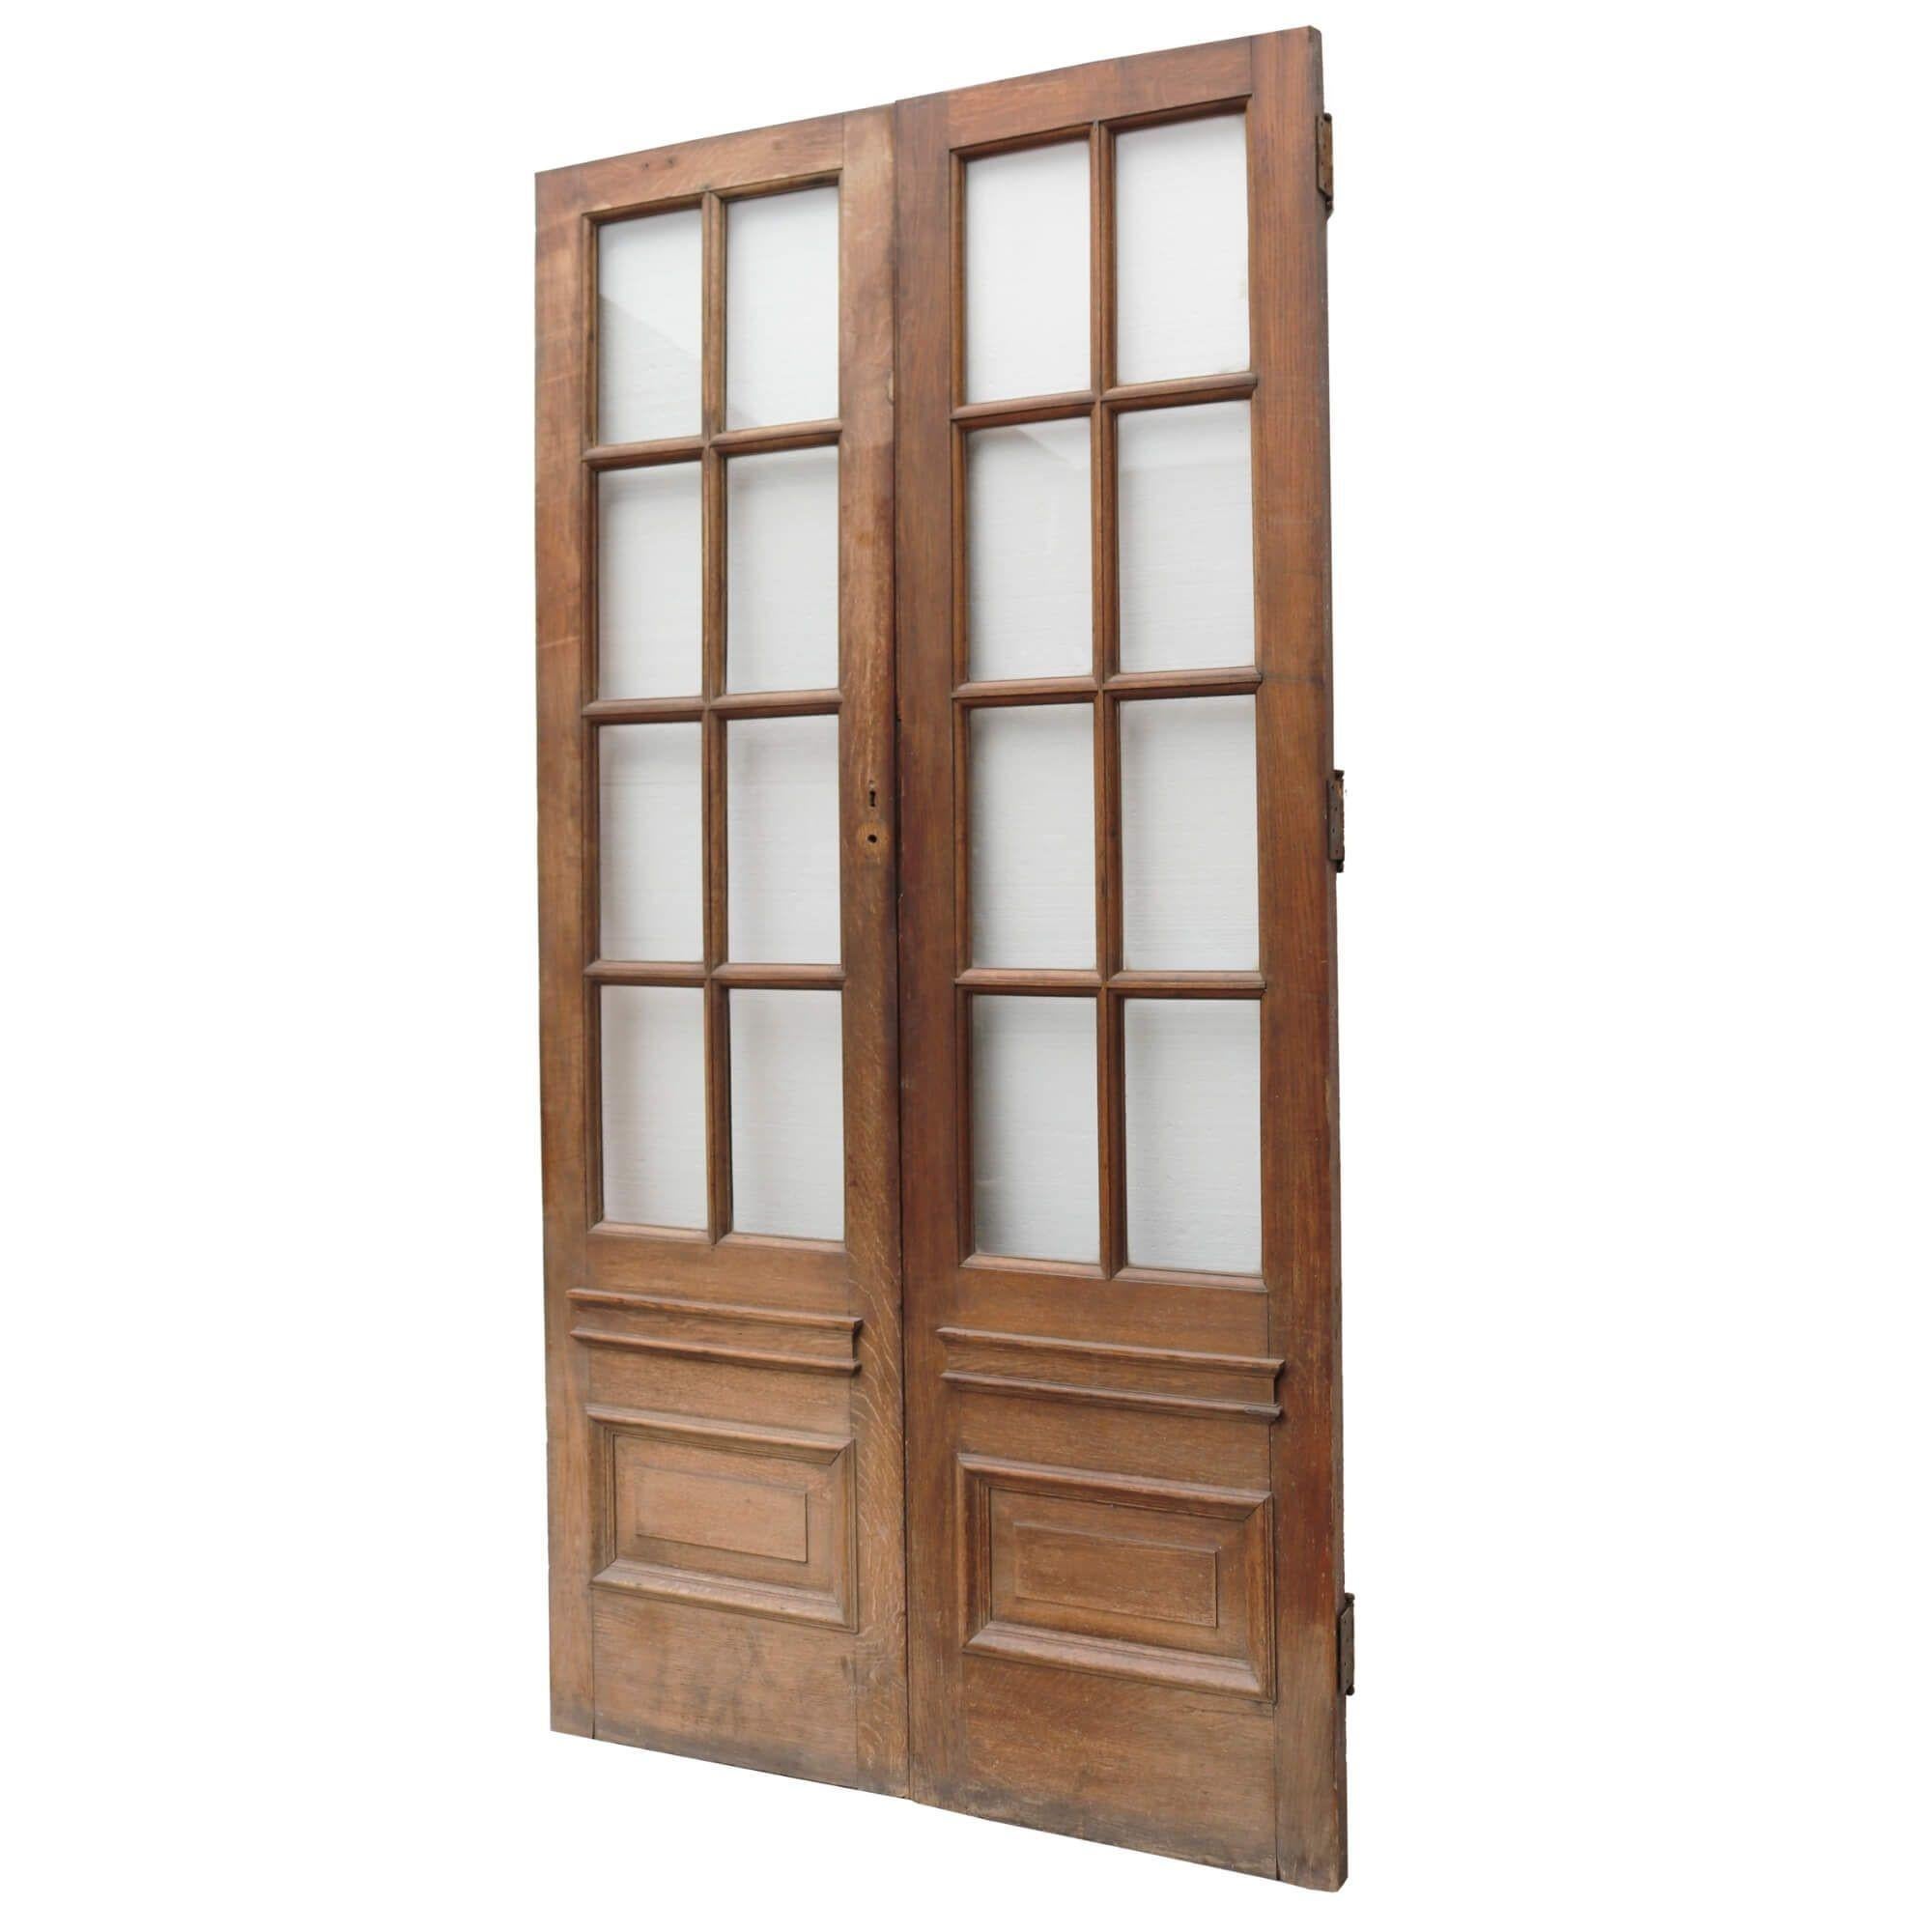 This tall pair of reclaimed oak doors instil an interior with classical elegance. Suited to traditional homes with period details and tall ceilings, these internal double oak doors with glass make spectacular dividing doors between dining rooms,